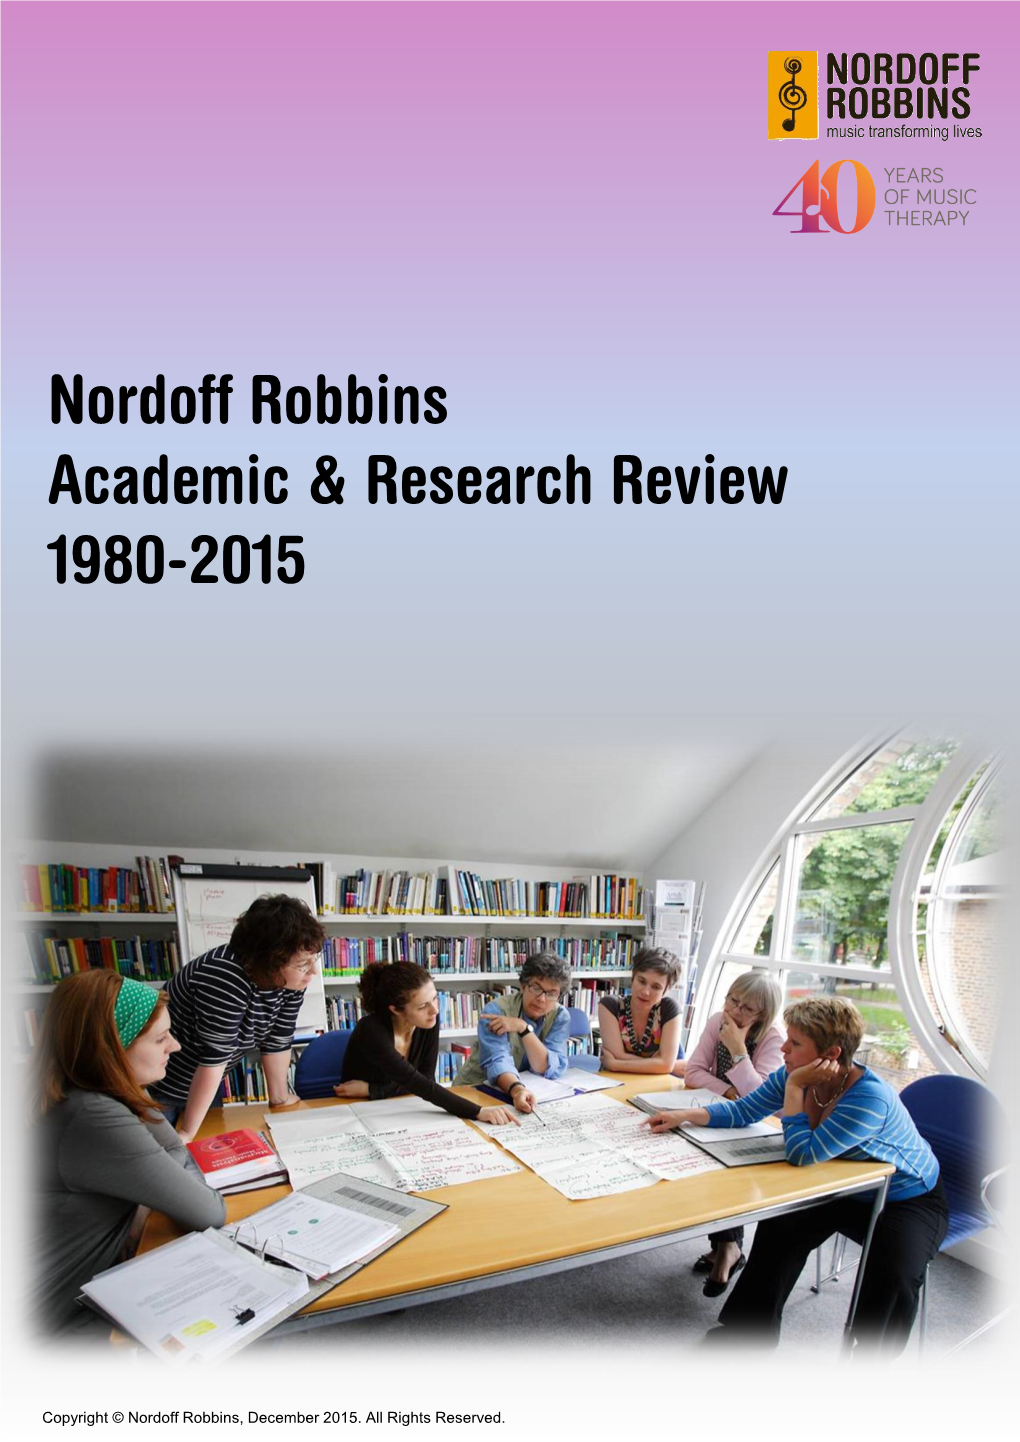 Nordoff Robbins Academic & Research Review 1980-2015